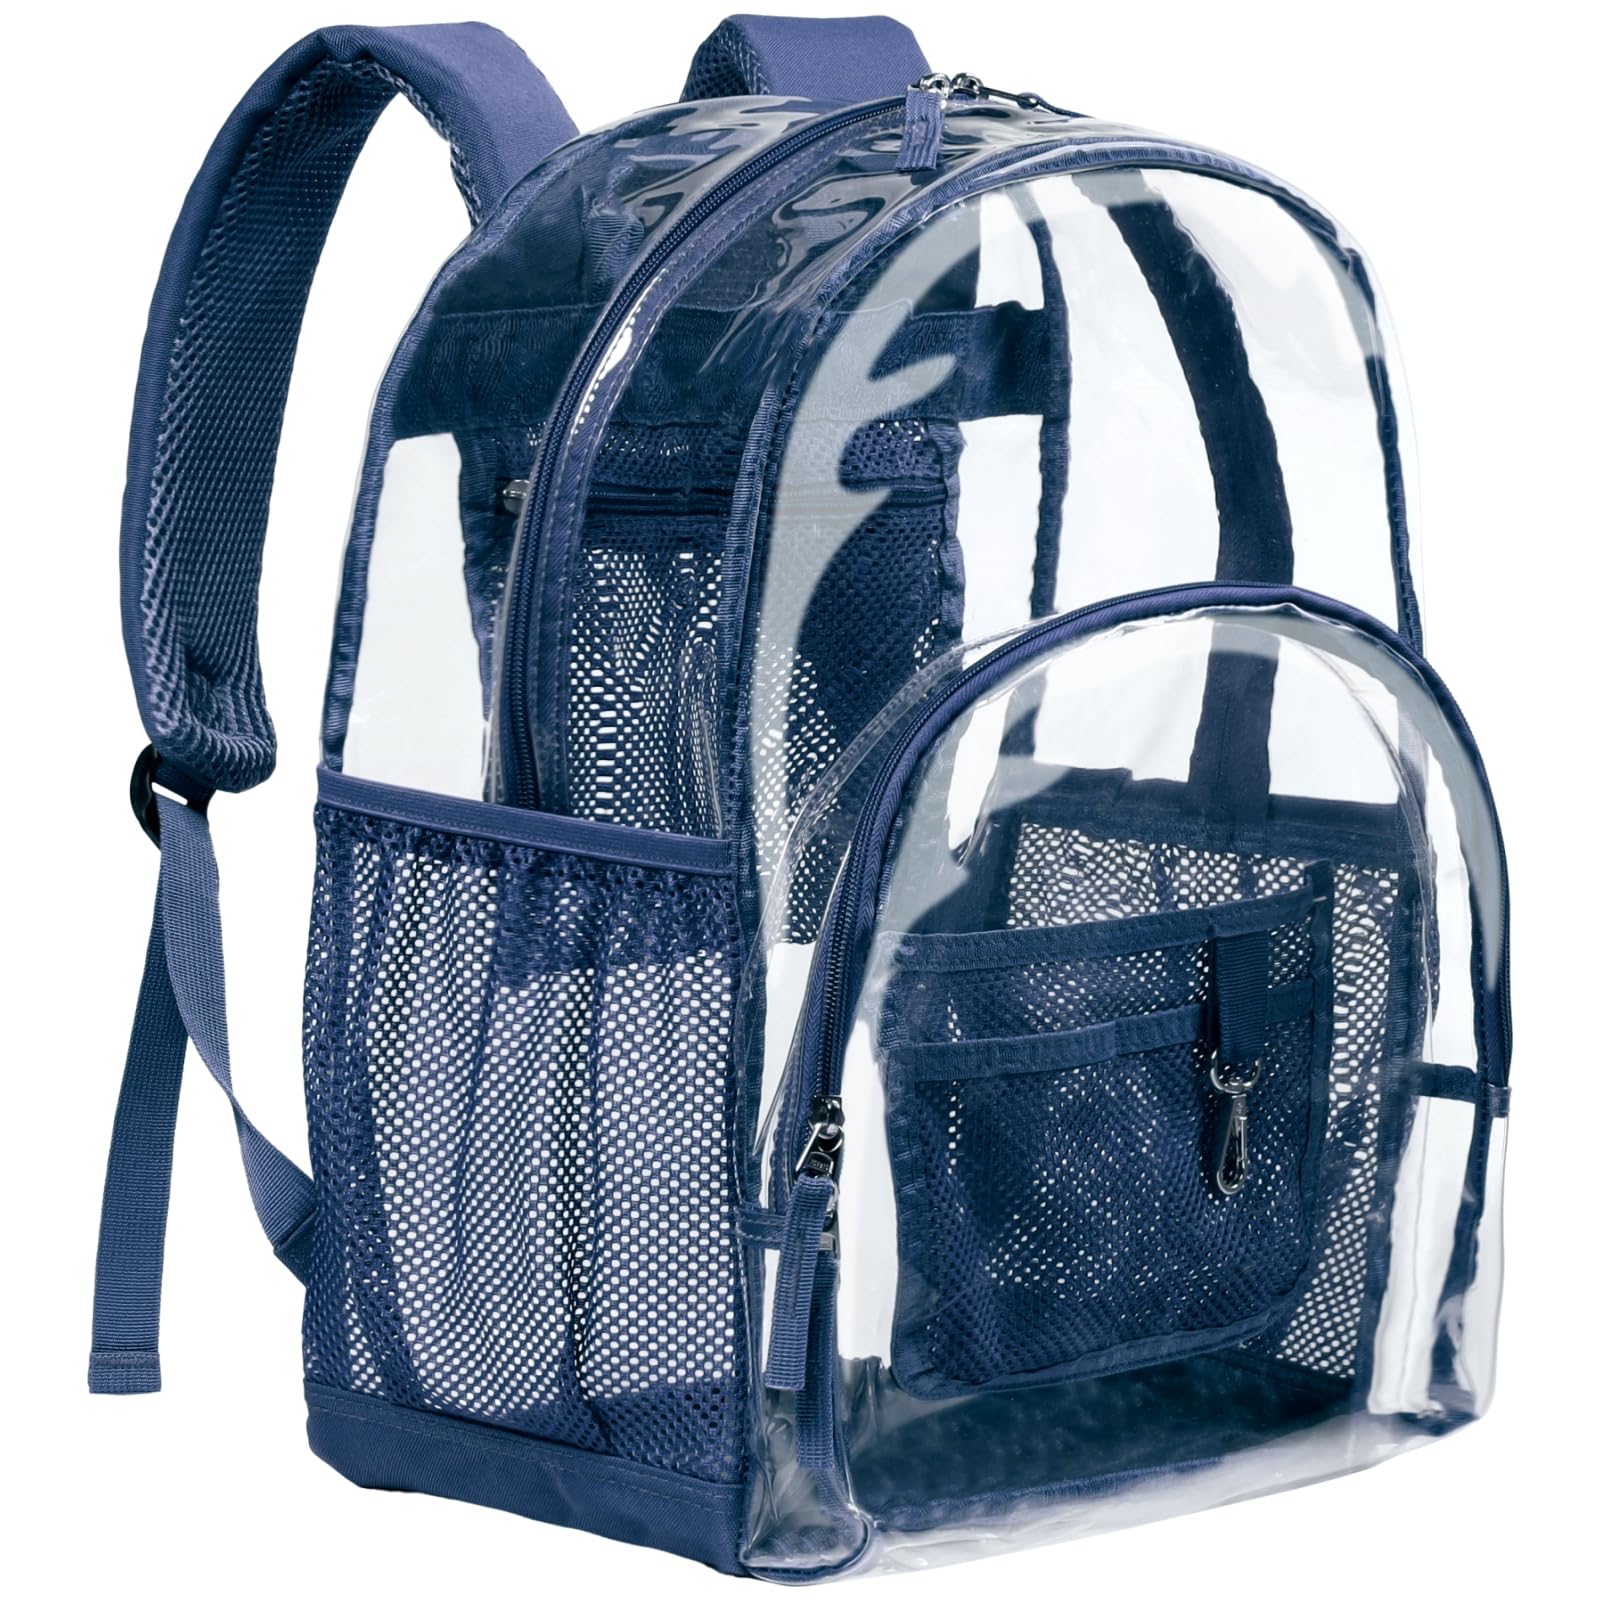 Clear backpack for college